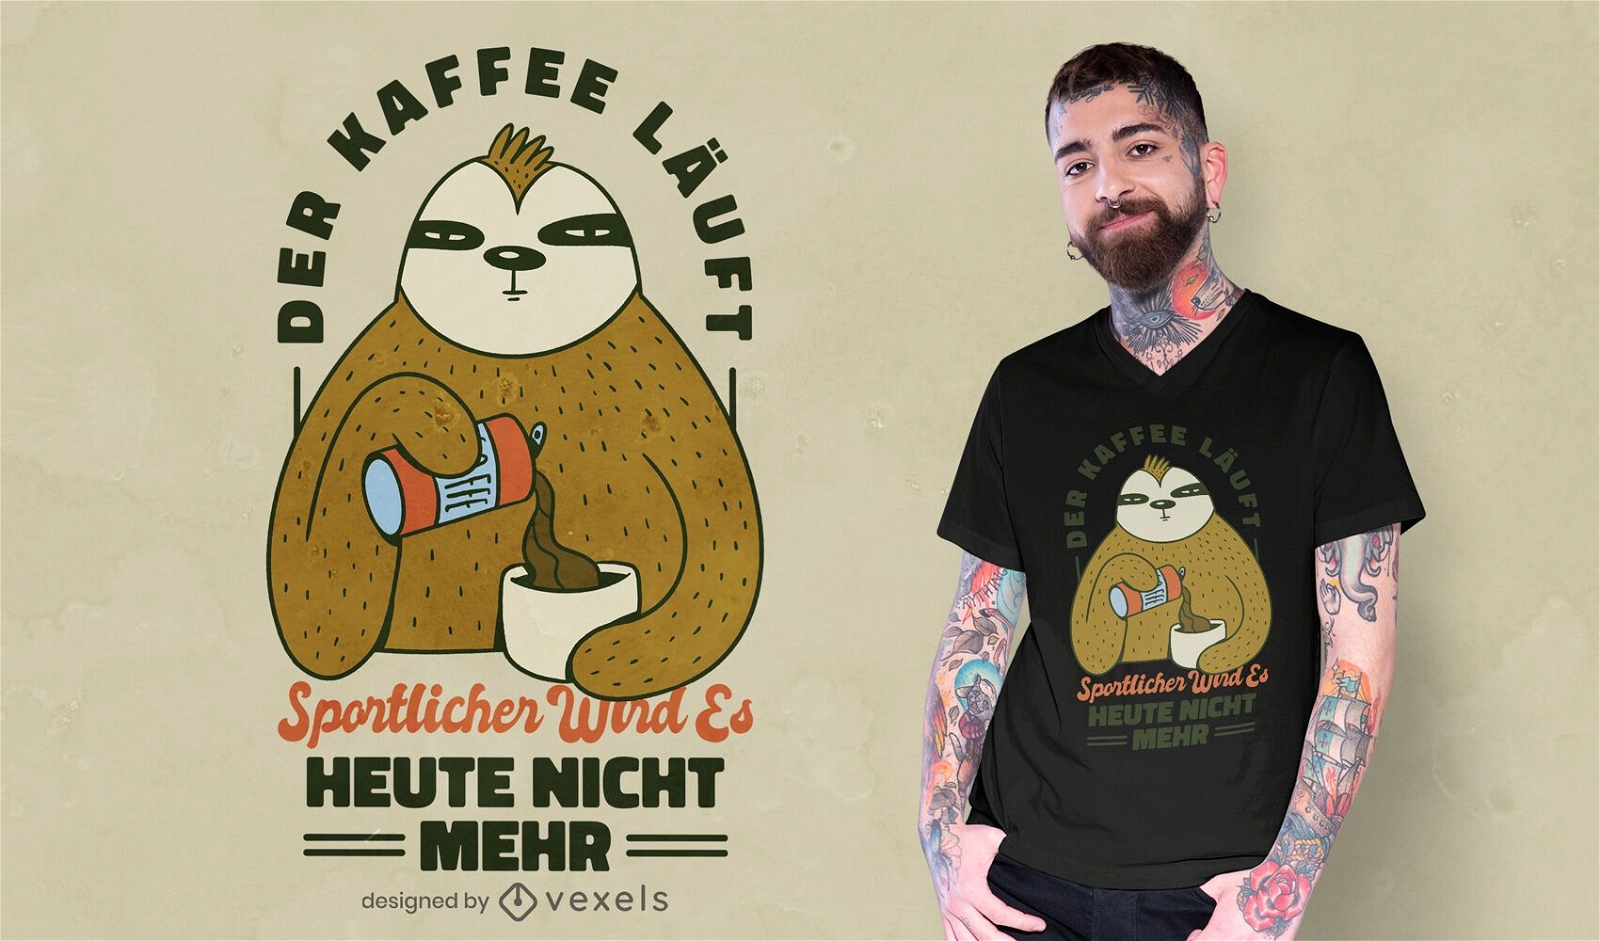 Coffee sloth t-shirt quote